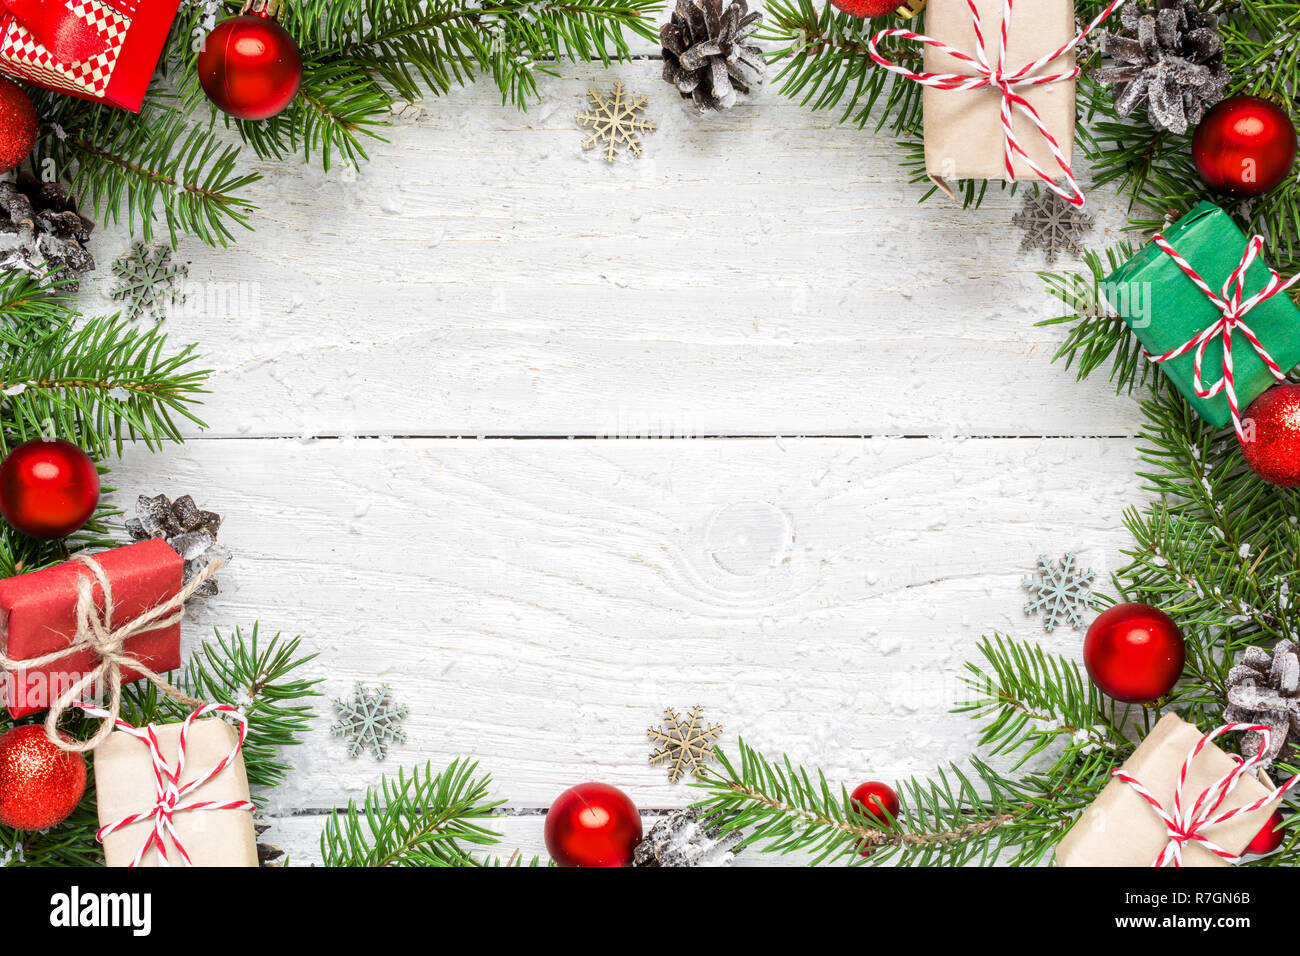 Christmas frame made of fir branches, festive decorations, gift boxes and pine cones on white wooden table. Christmas background. Flat lay. top view w Stock Photo